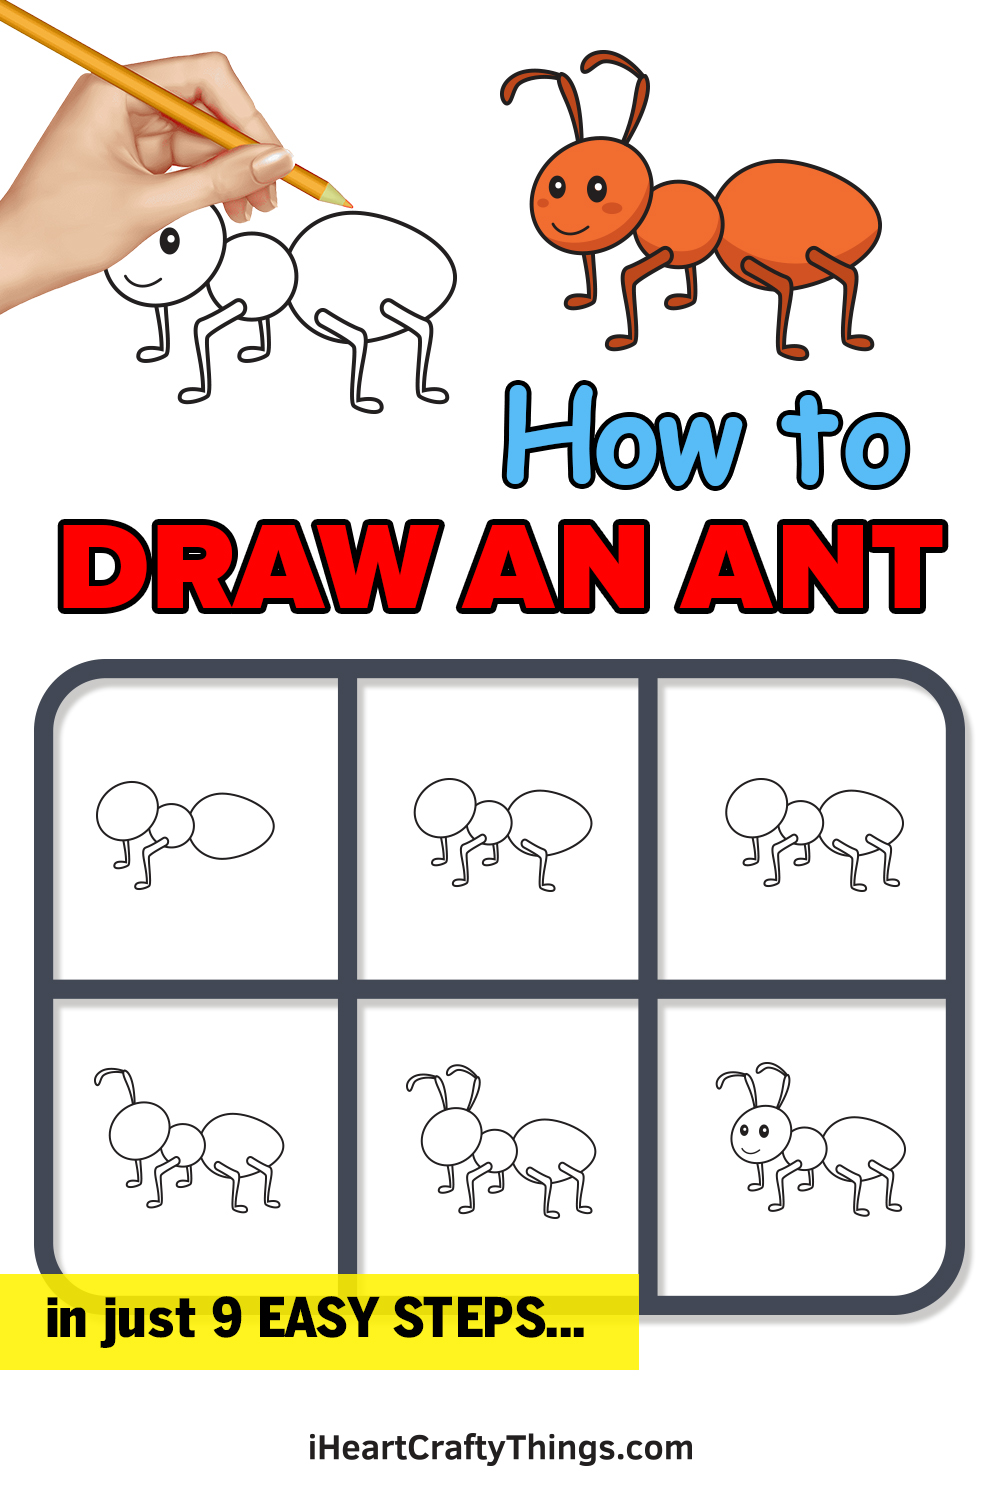 how to draw an ant in 9 easy steps